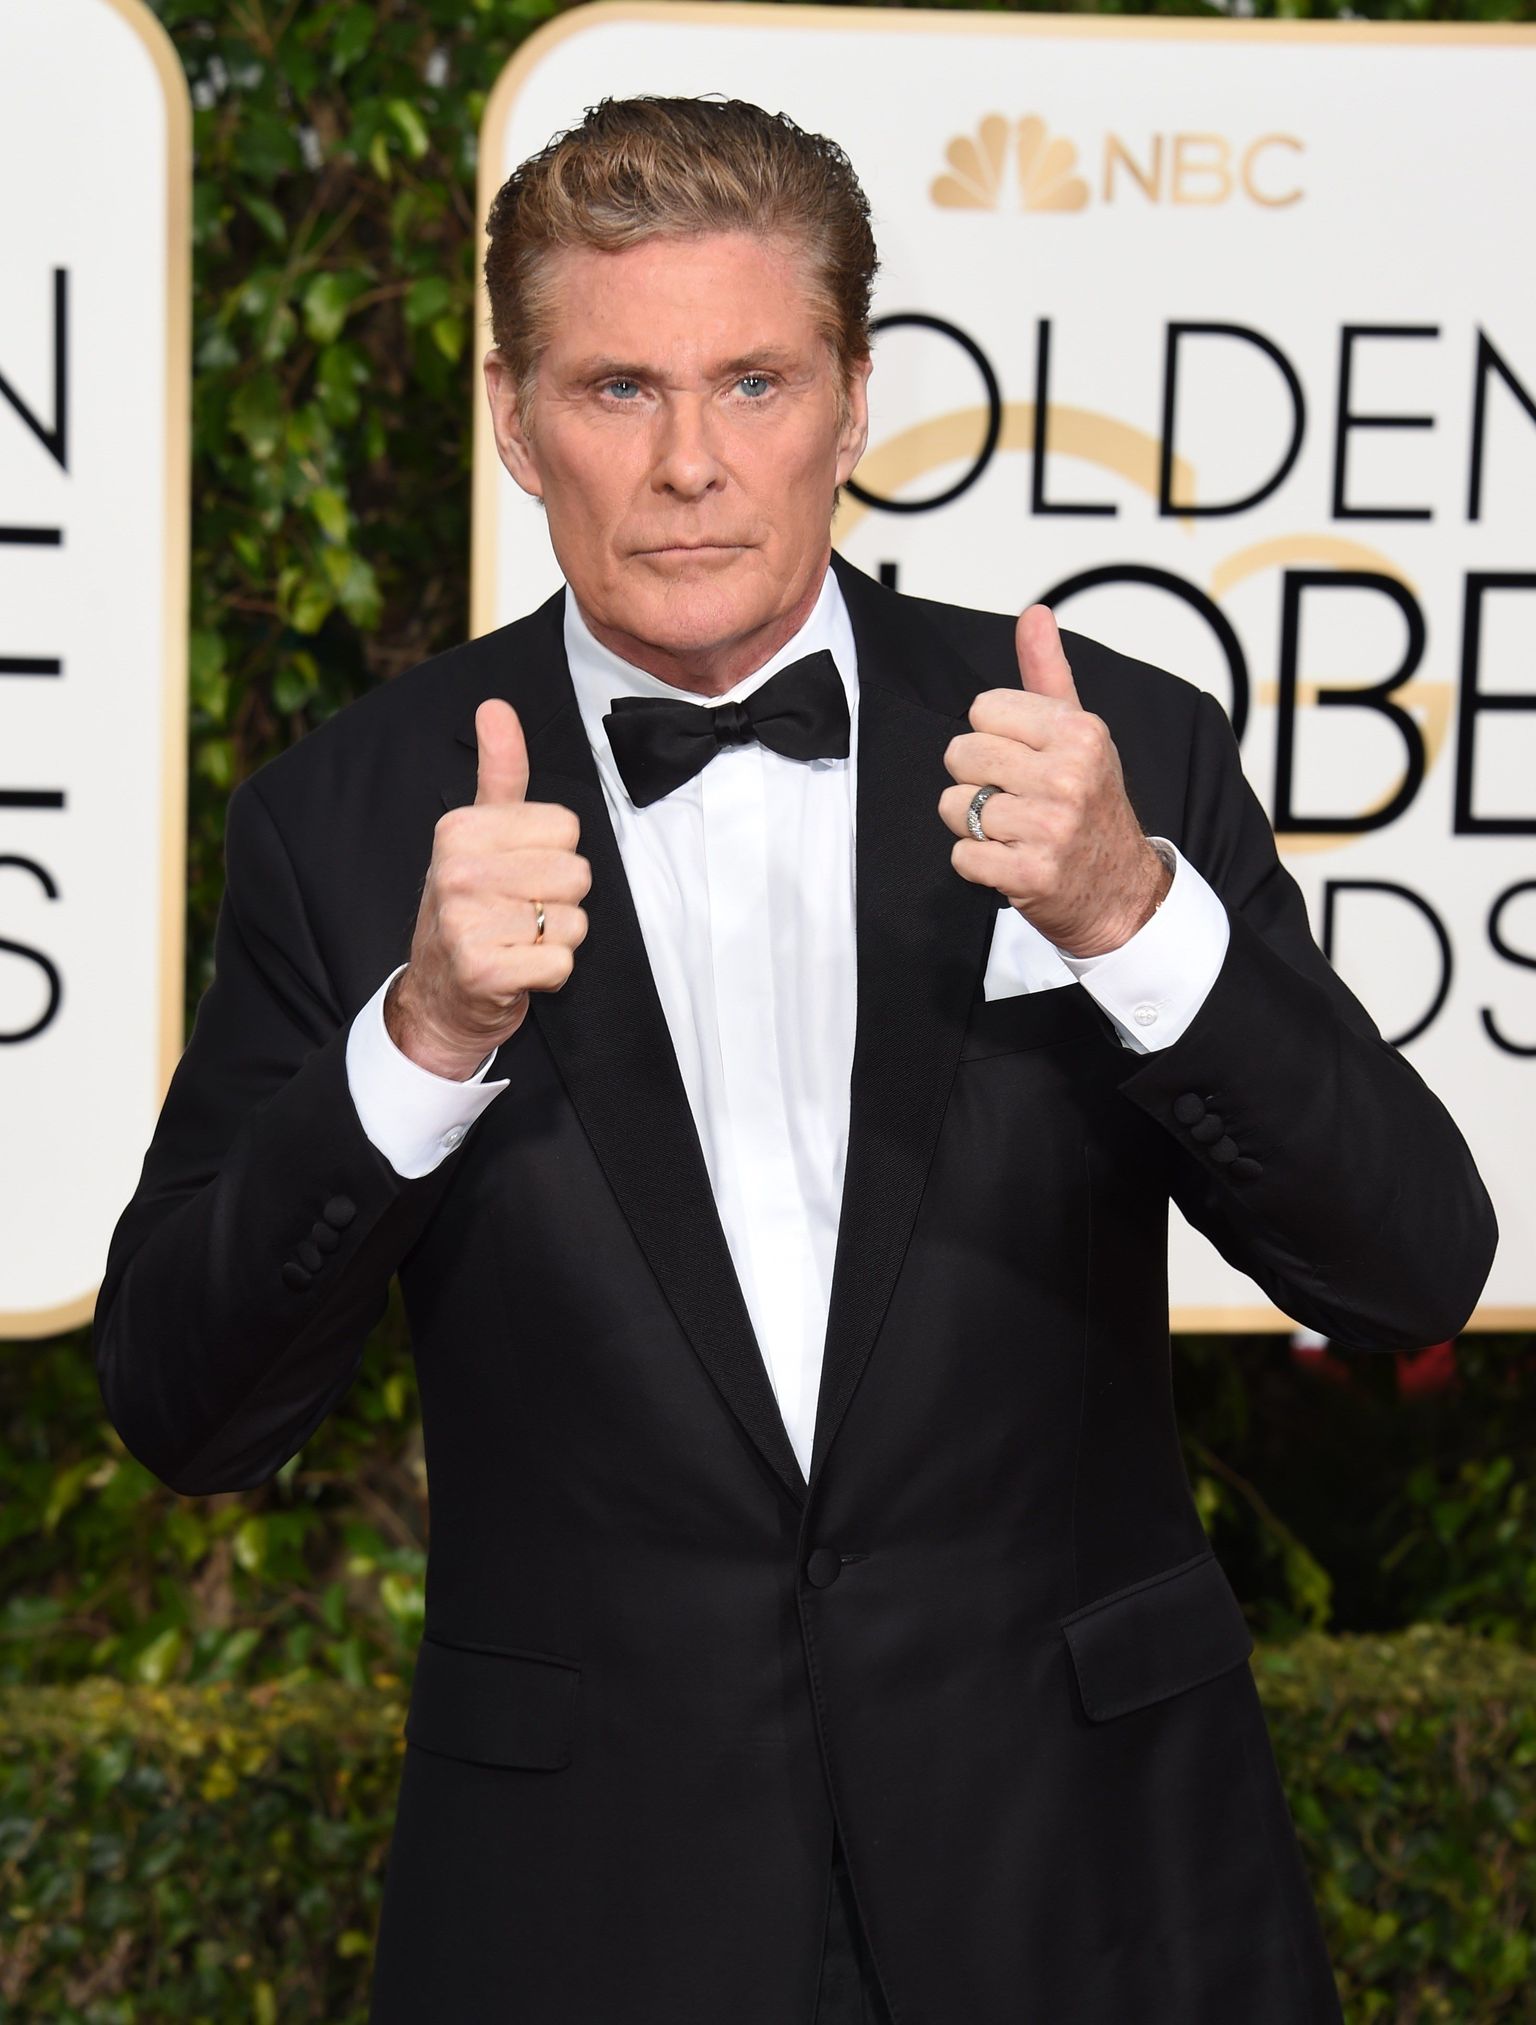 David Hasselhoff arrives at the 73nd annual Golden Globe Awards, January 10, 2016, at the Beverly Hilton Hotel in Beverly Hills, California. AFP PHOTO / VALERIE MACON